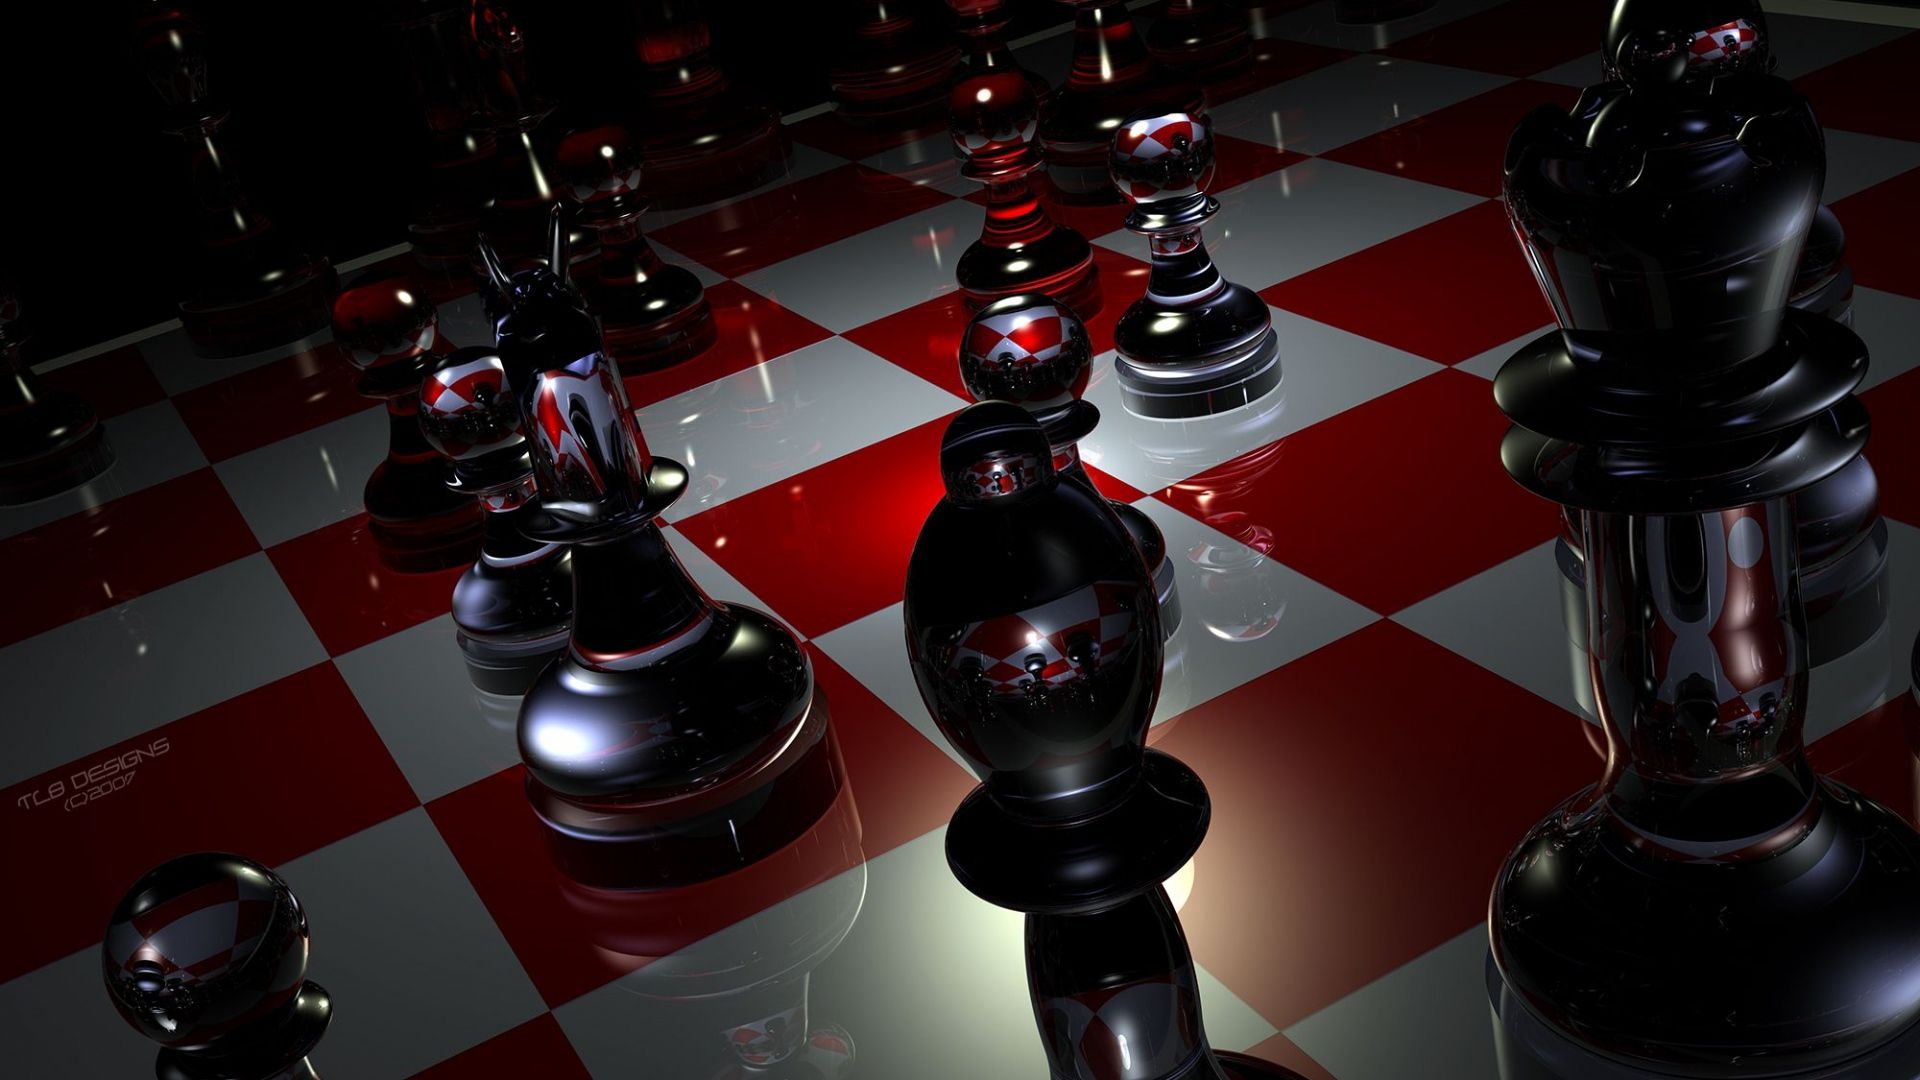 Download Wallpaper 1920x1080 Pieces, Chess, Boards, Glass Full HD